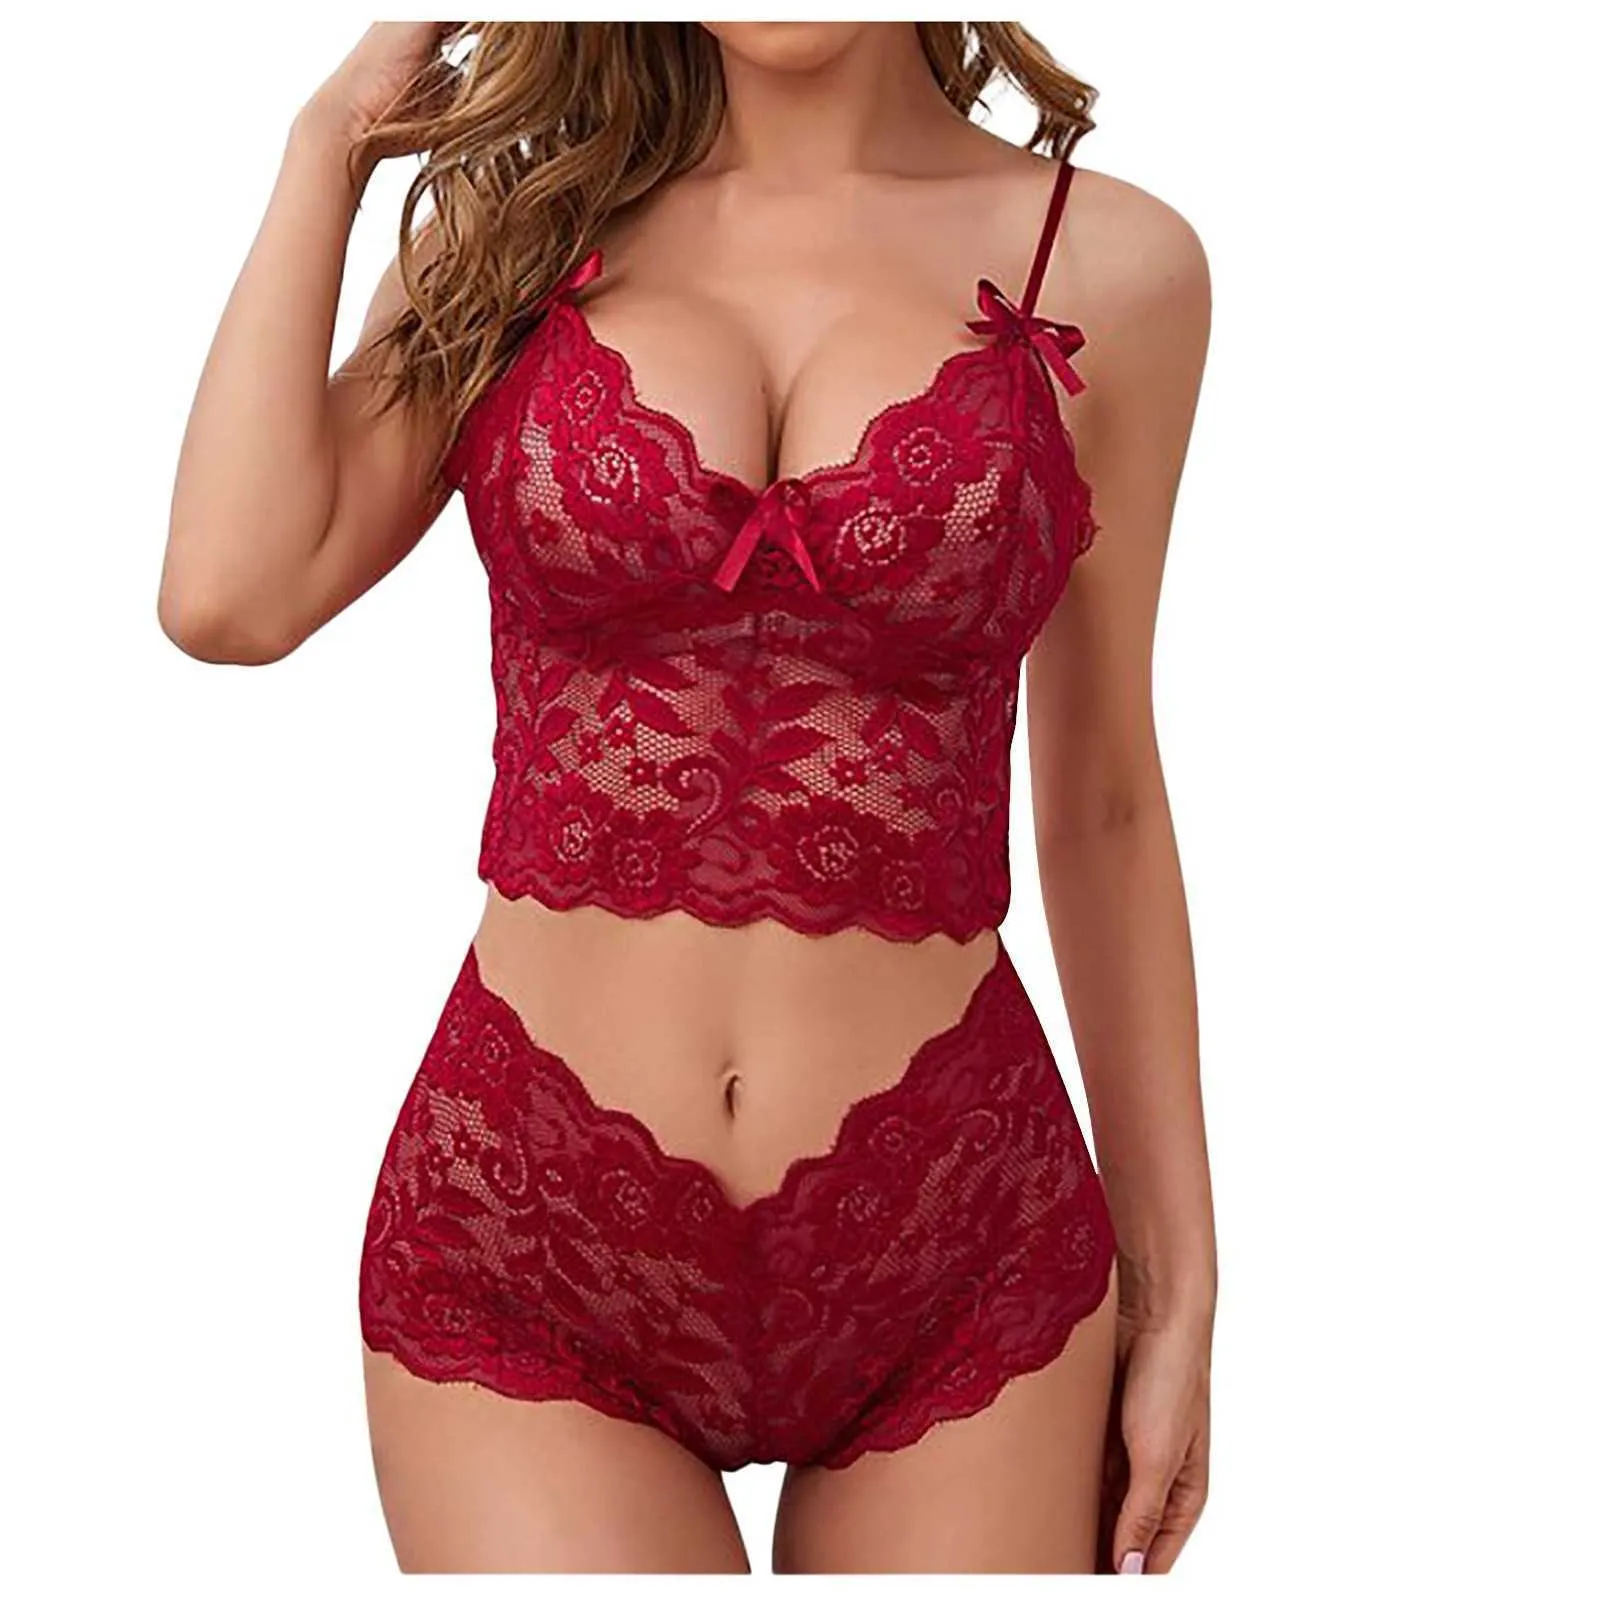 Sexy Maternity Lingerie Set With Thin Flower Print, Adjustable Shoulder  Strap, And Triangle Asia Cup 2022 Women For Women From Nickyoung06, $11.9